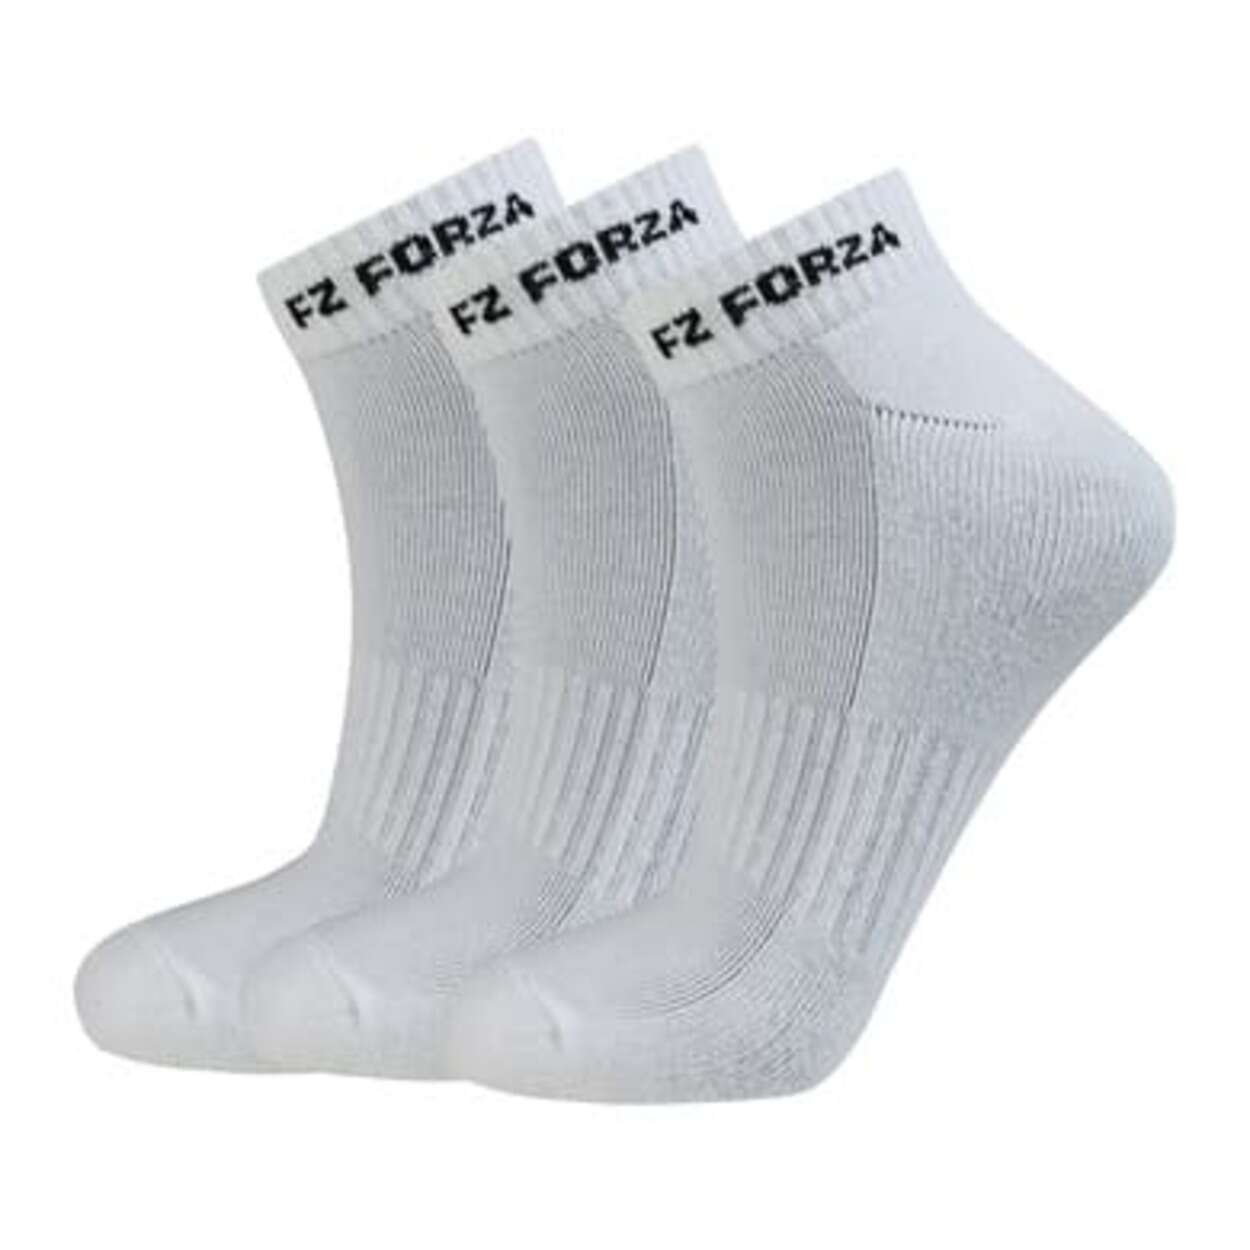 Forza Chaussettes Comfort Courtes Blanches 3 paires